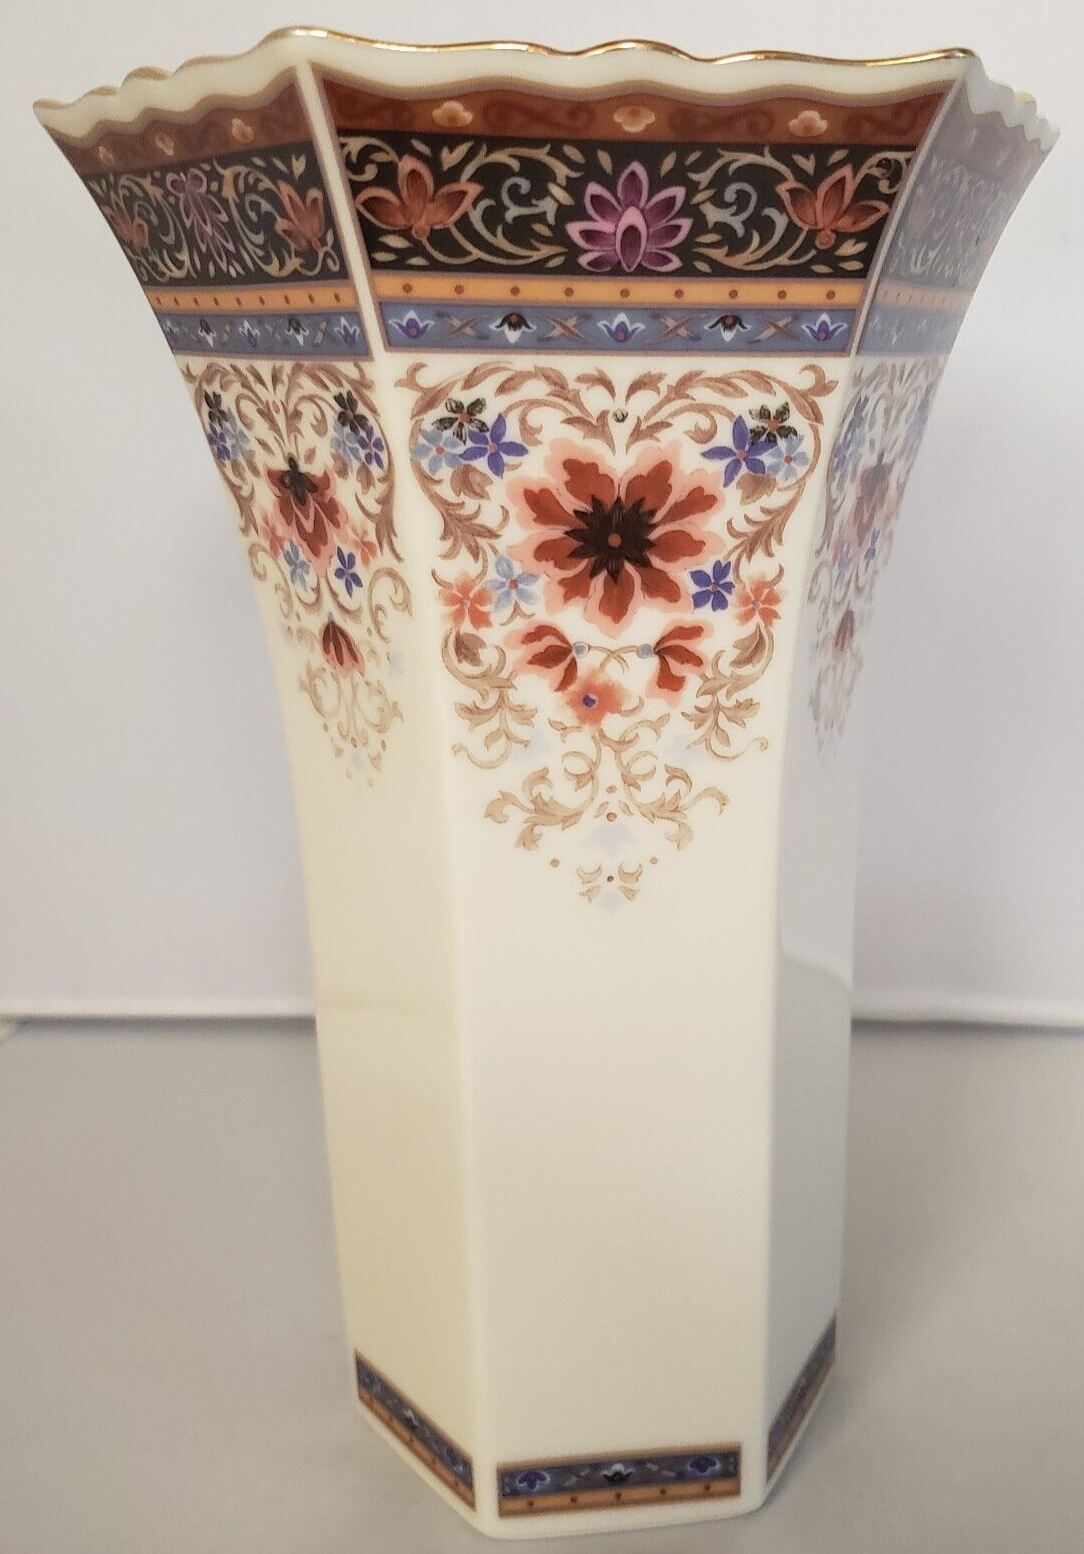 Primary image for Lenox Vase Made In USA Eastern Treasures Collection 7 3/4" Tall